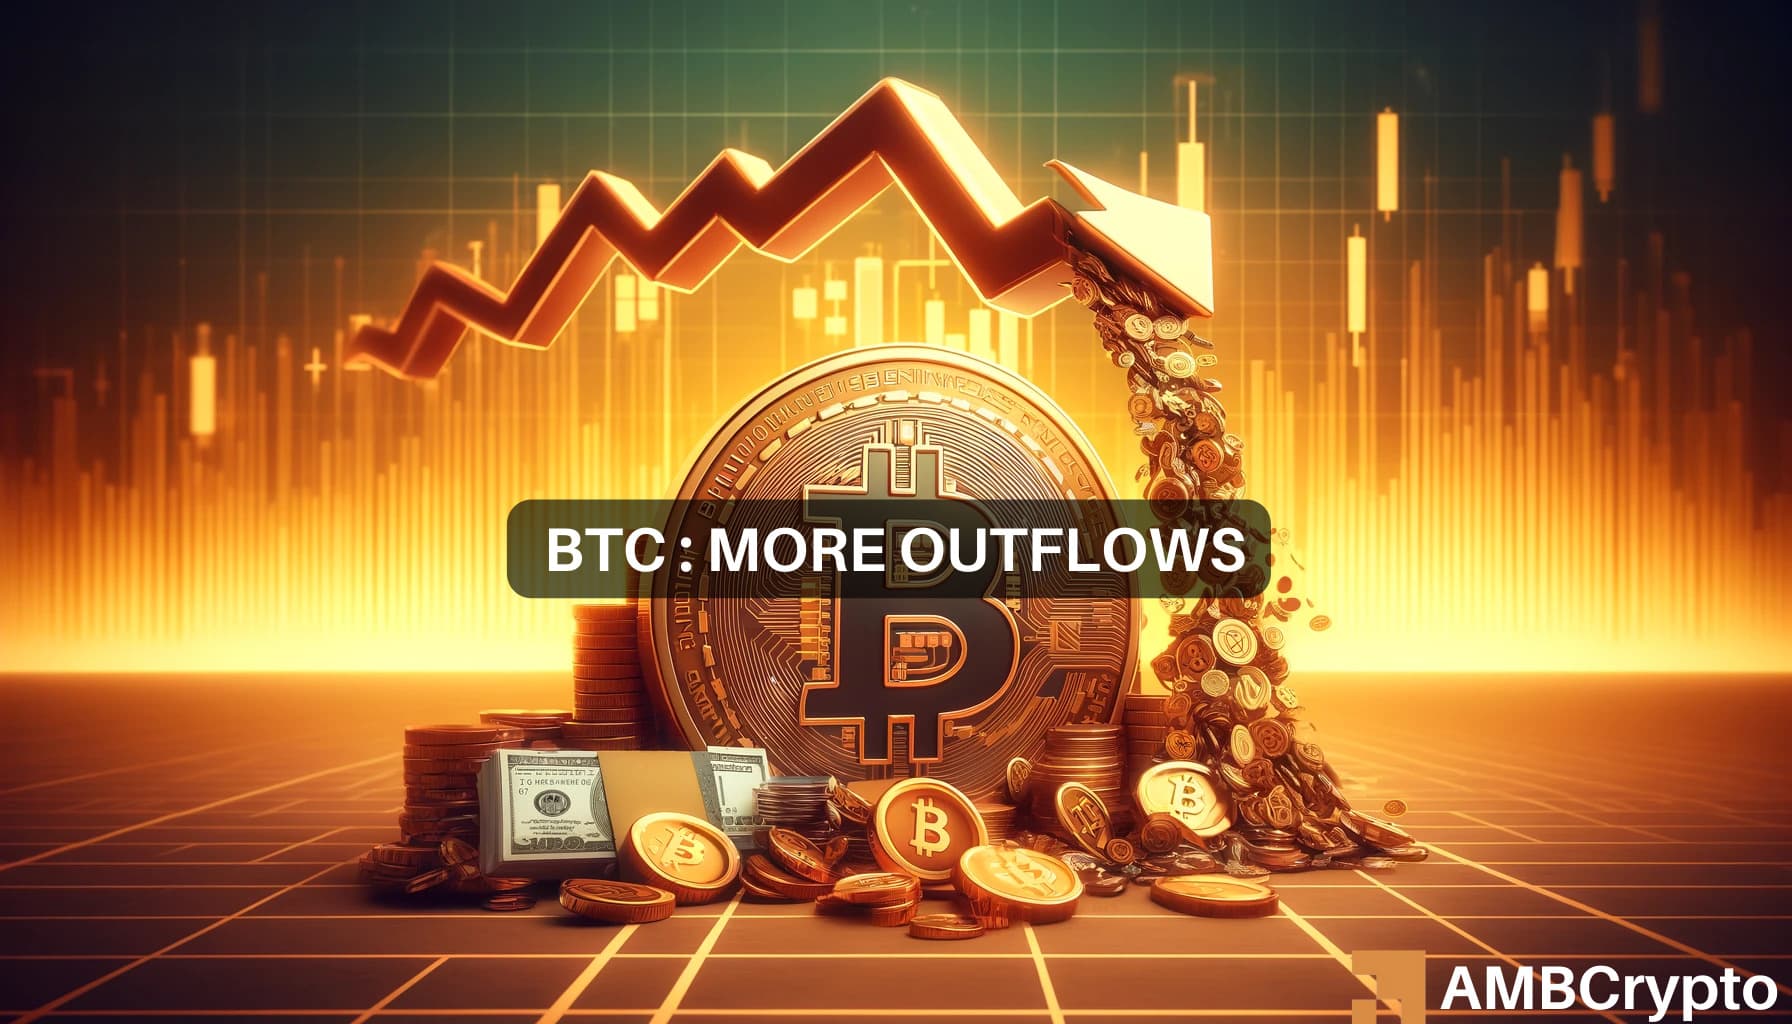 Can Bitcoin above $66K reverse the $206 million outflows?